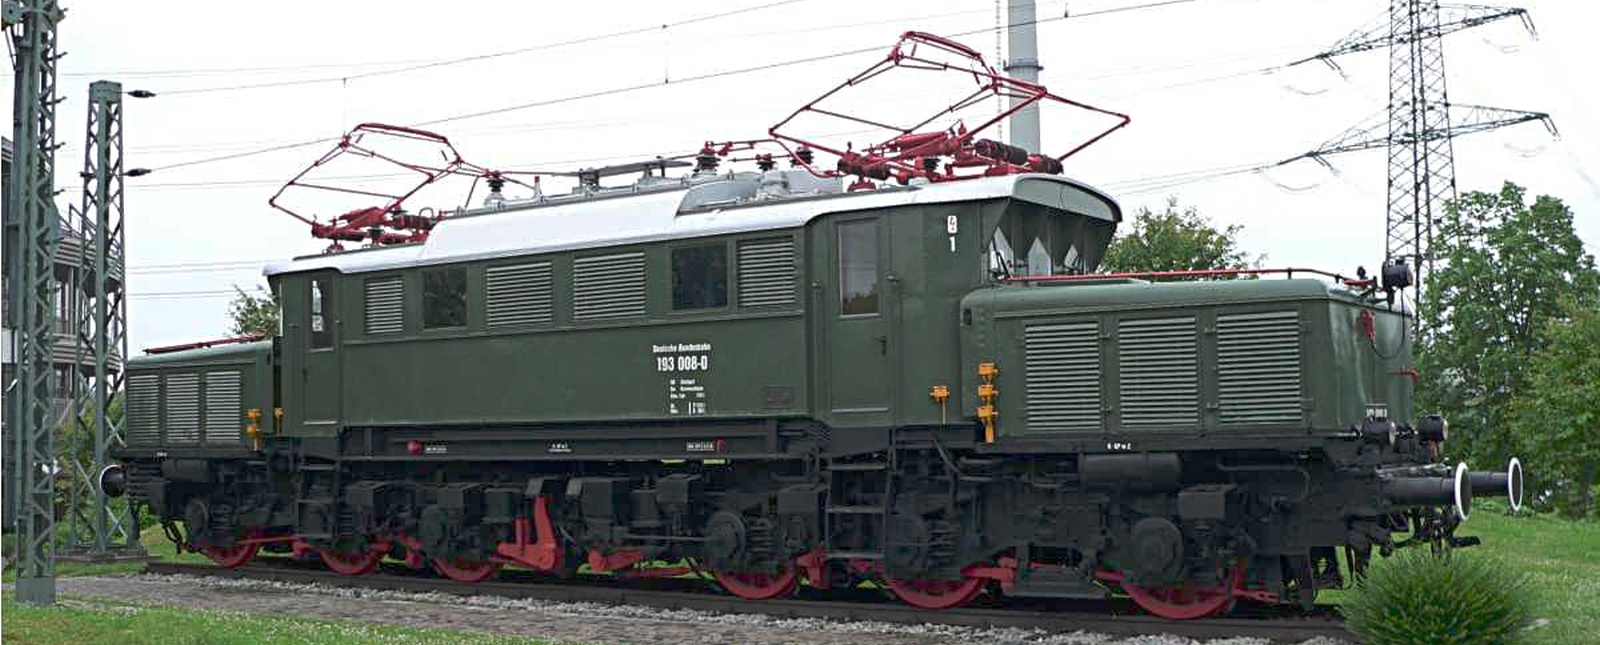 193 008 in May 2005 at the Neckarwestheim nuclear power plant